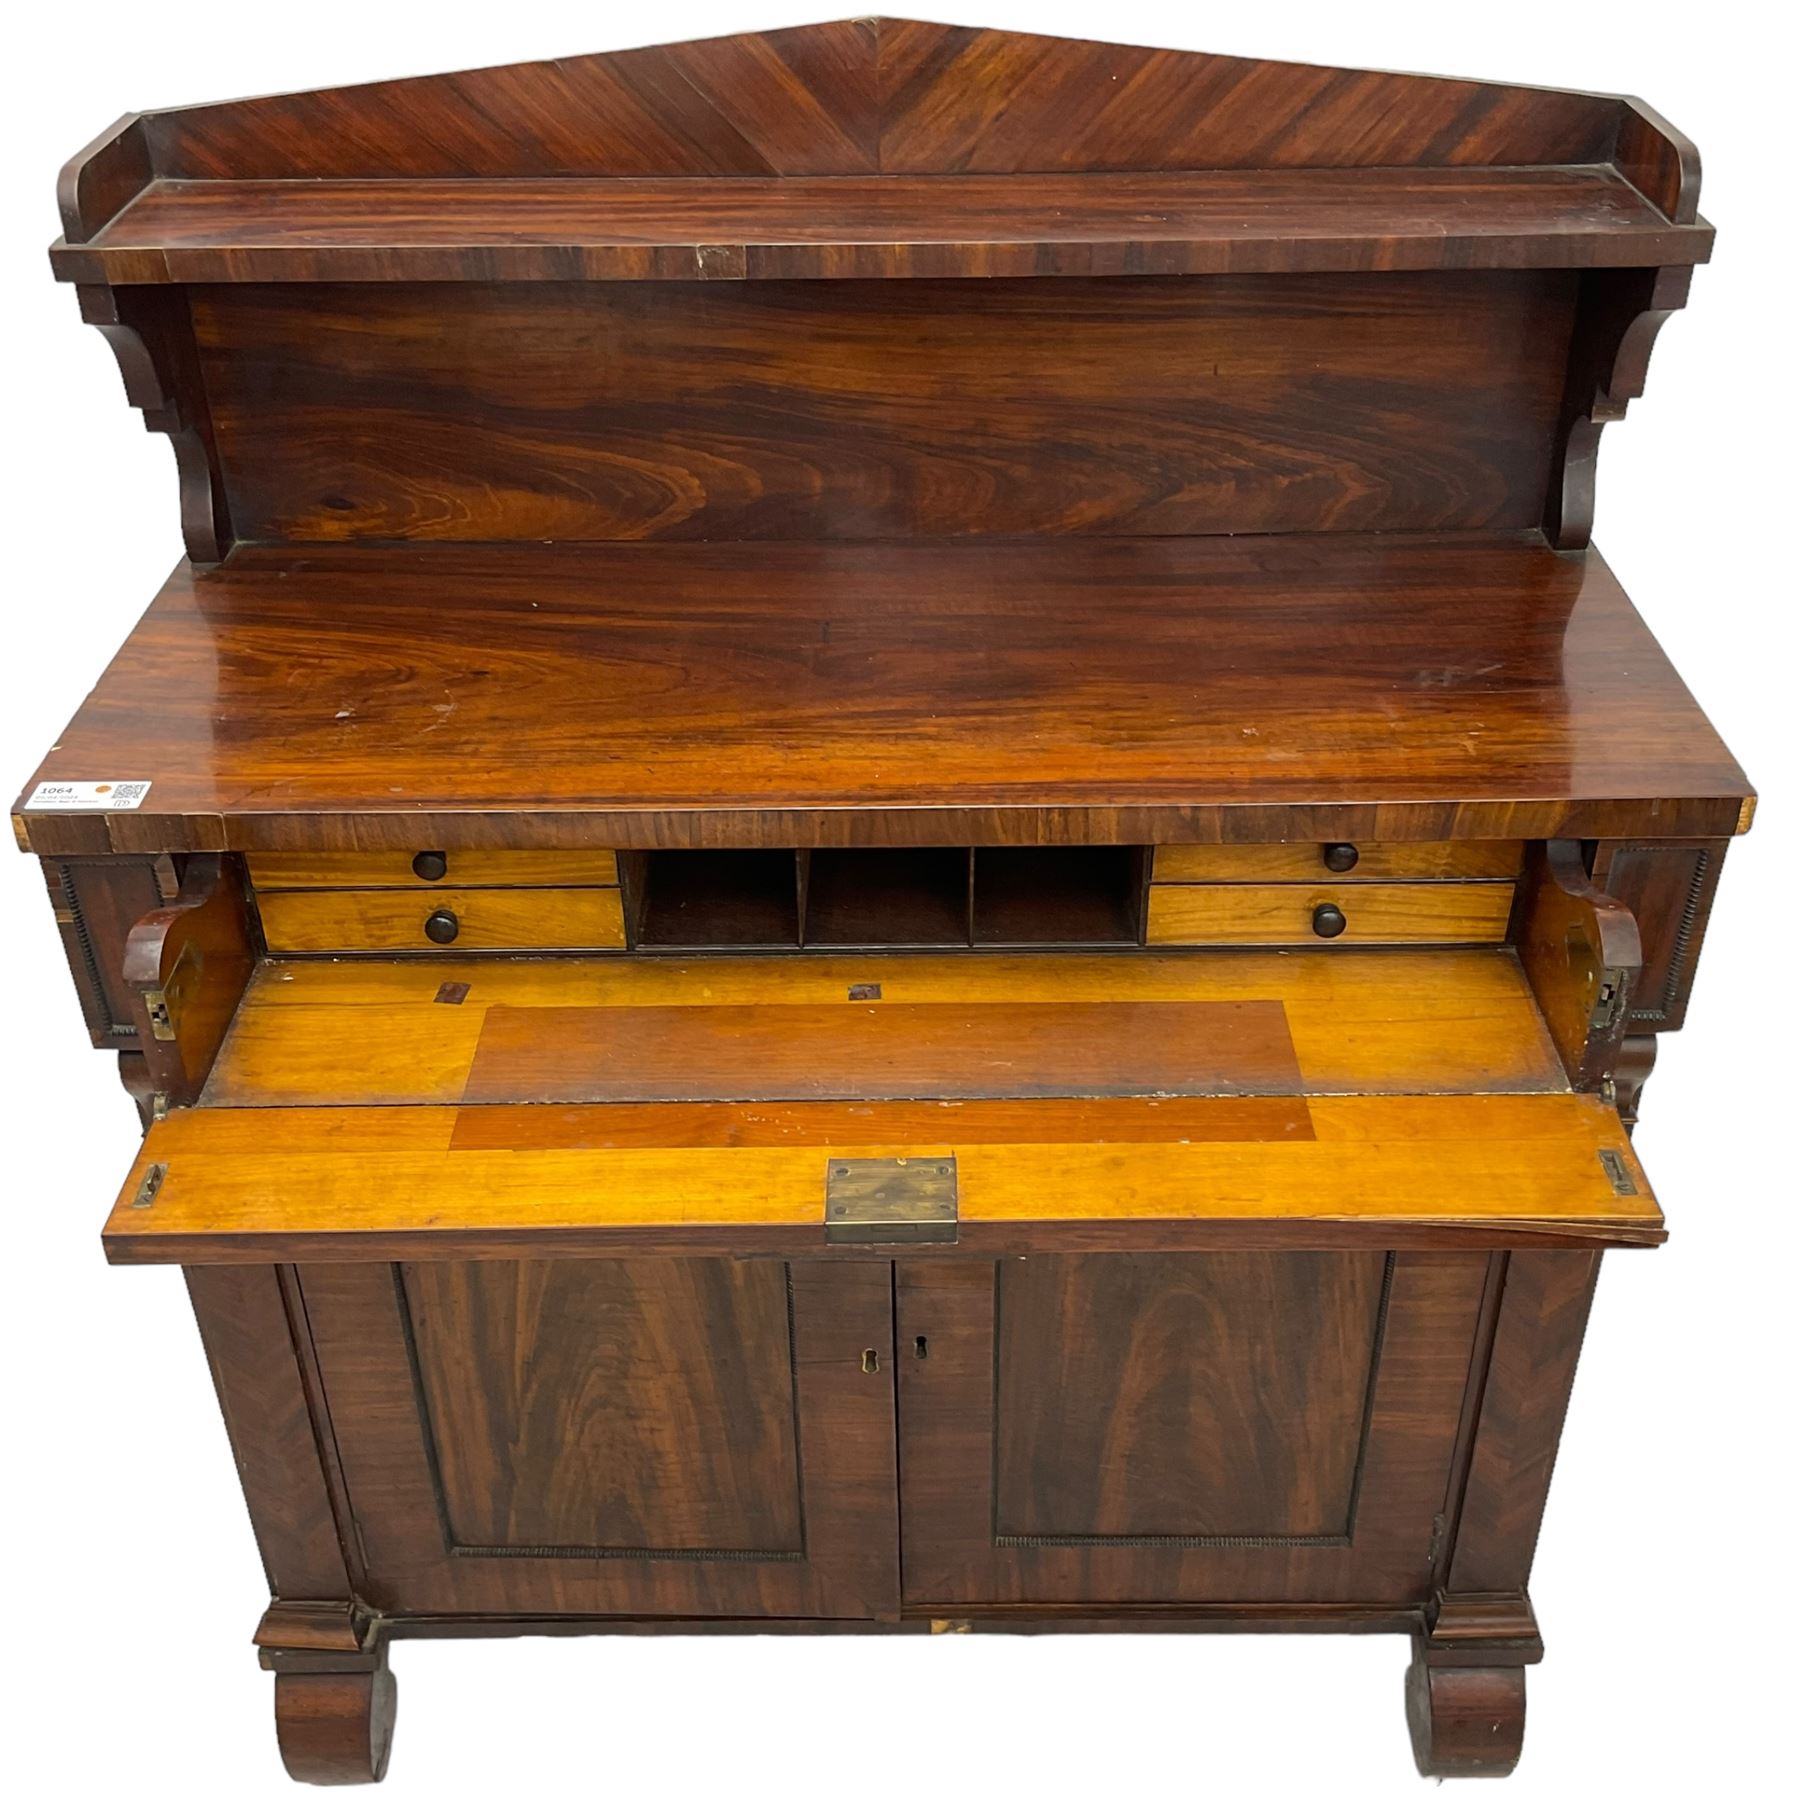 Early 19th century rosewood chiffonier - Image 7 of 7